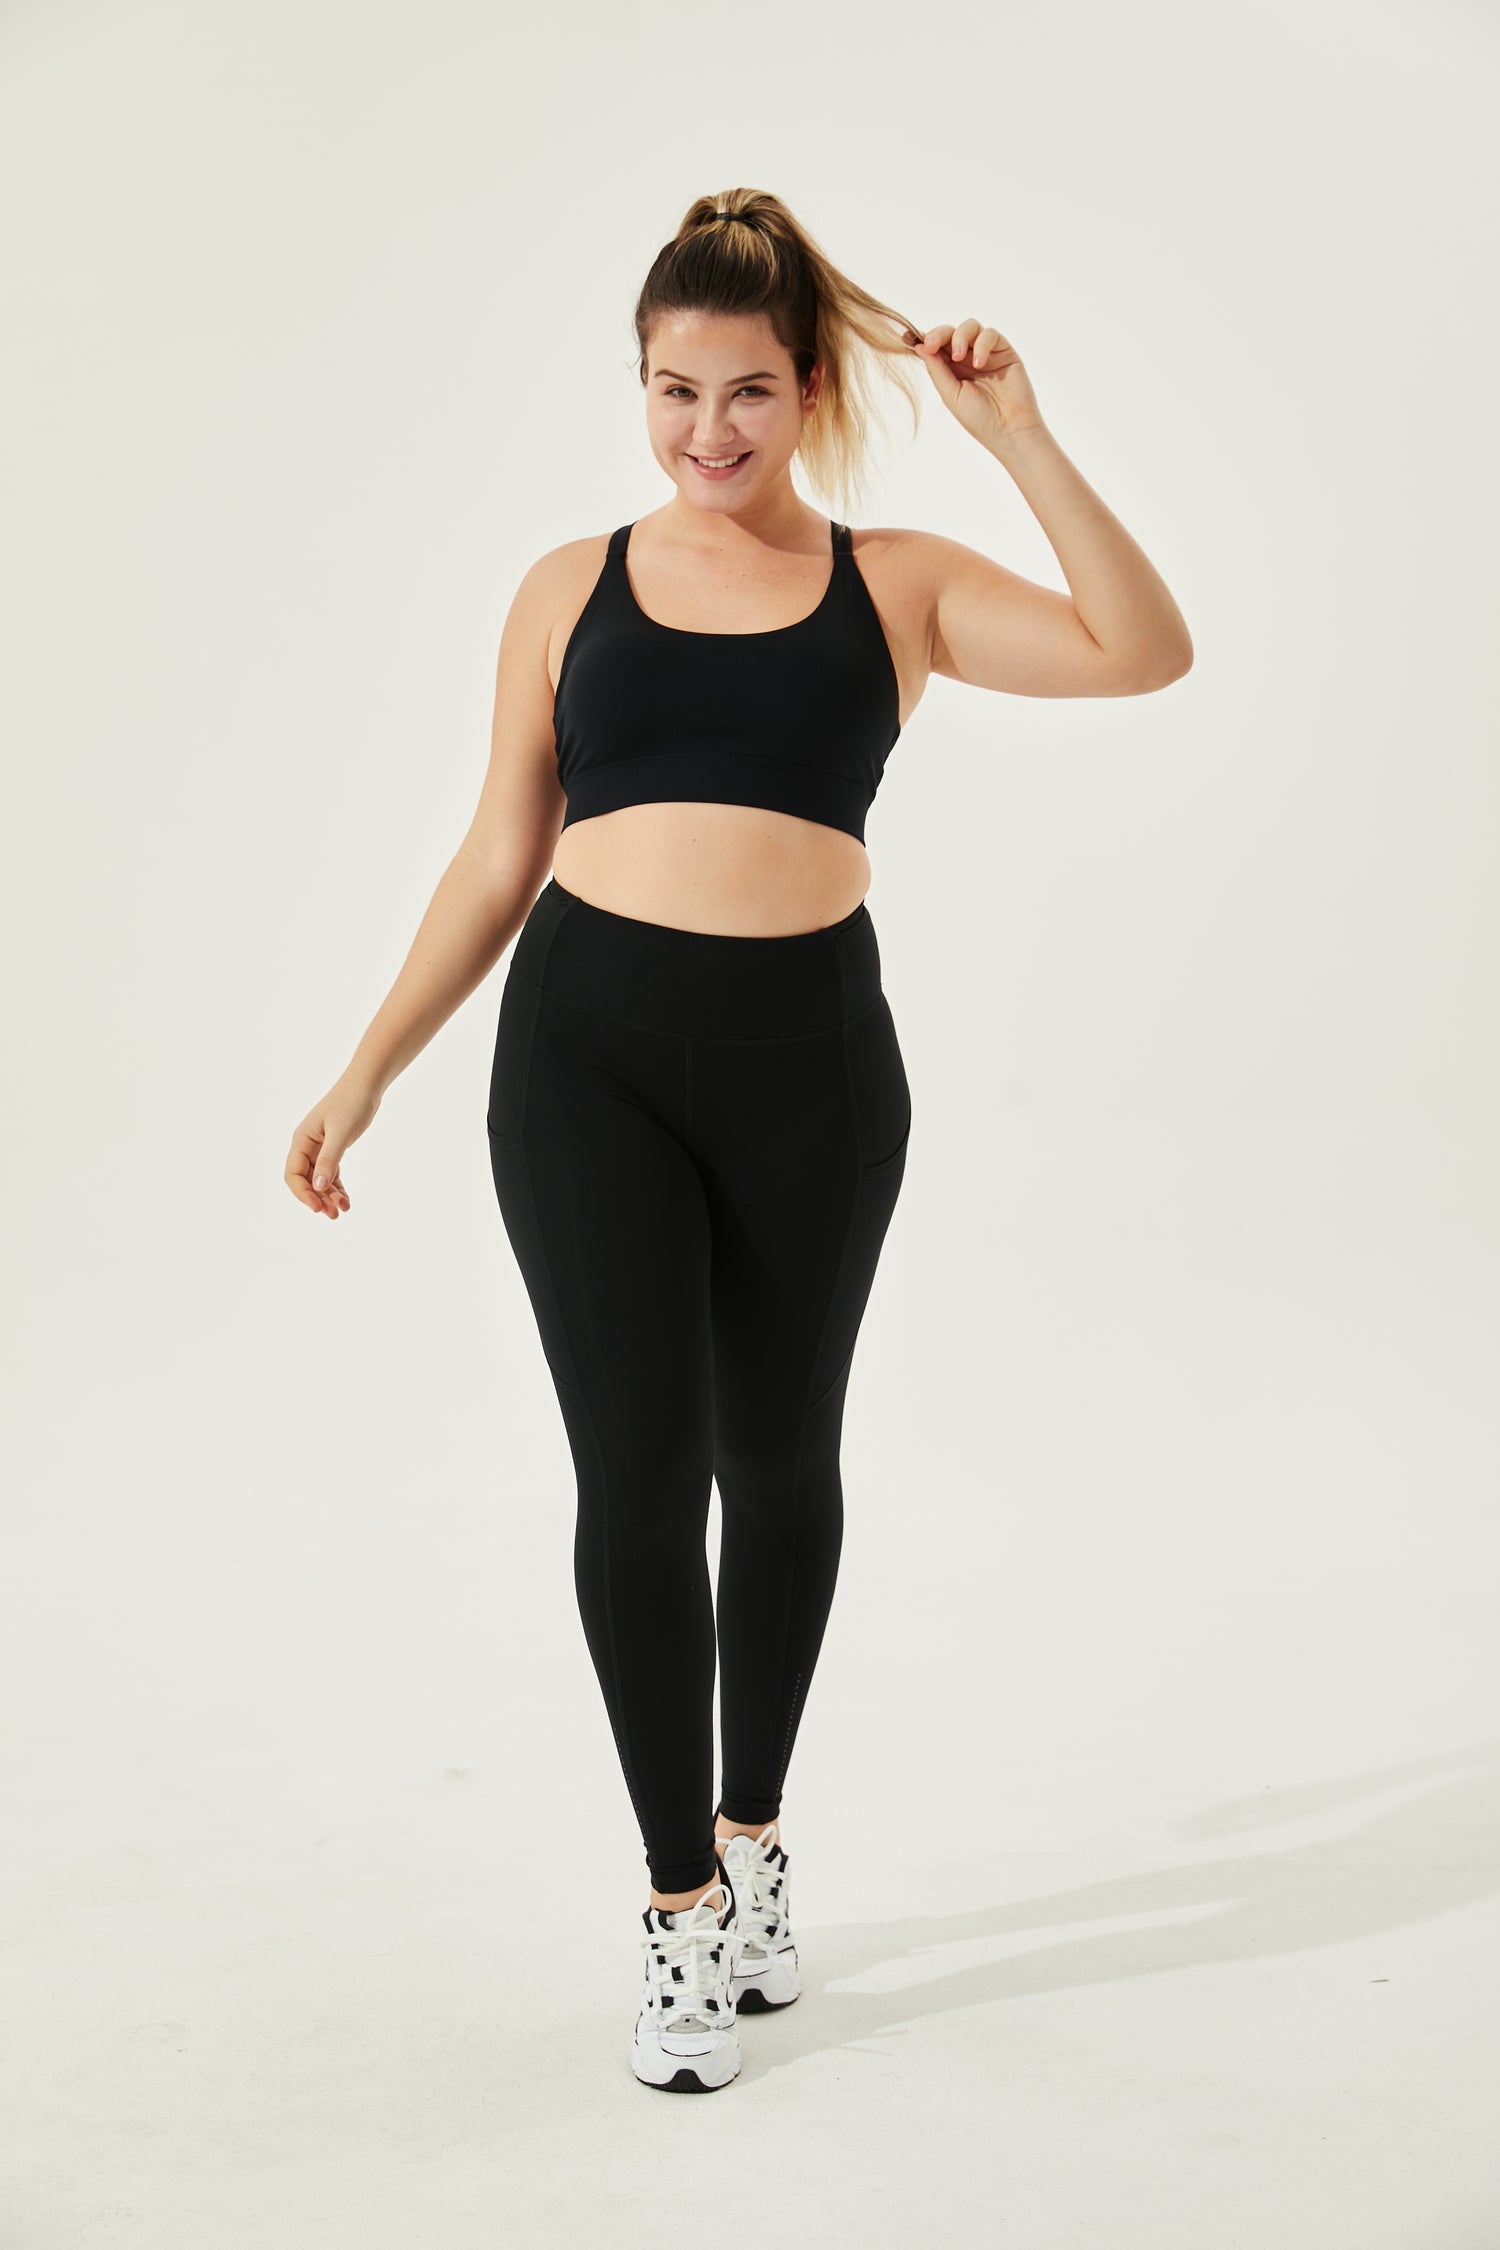 Leggings that Pass the Test 🏆: No More Camel Toe Worries - Gym Wear  Movement